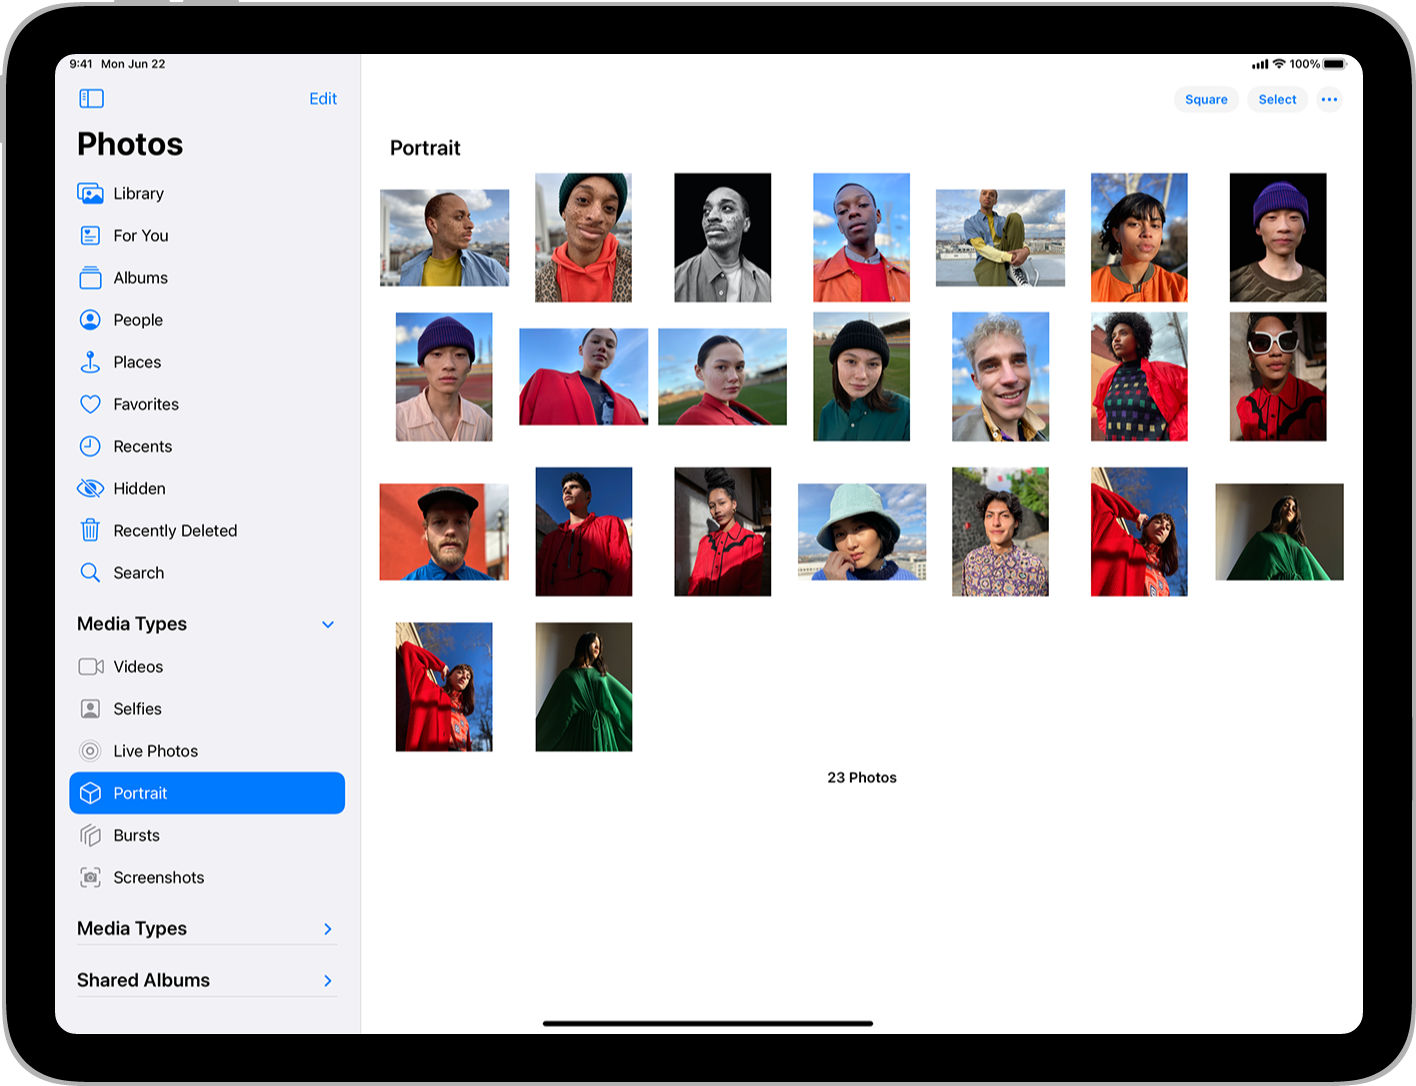 An example of the sidebar navigation style in the Apple Photos app.